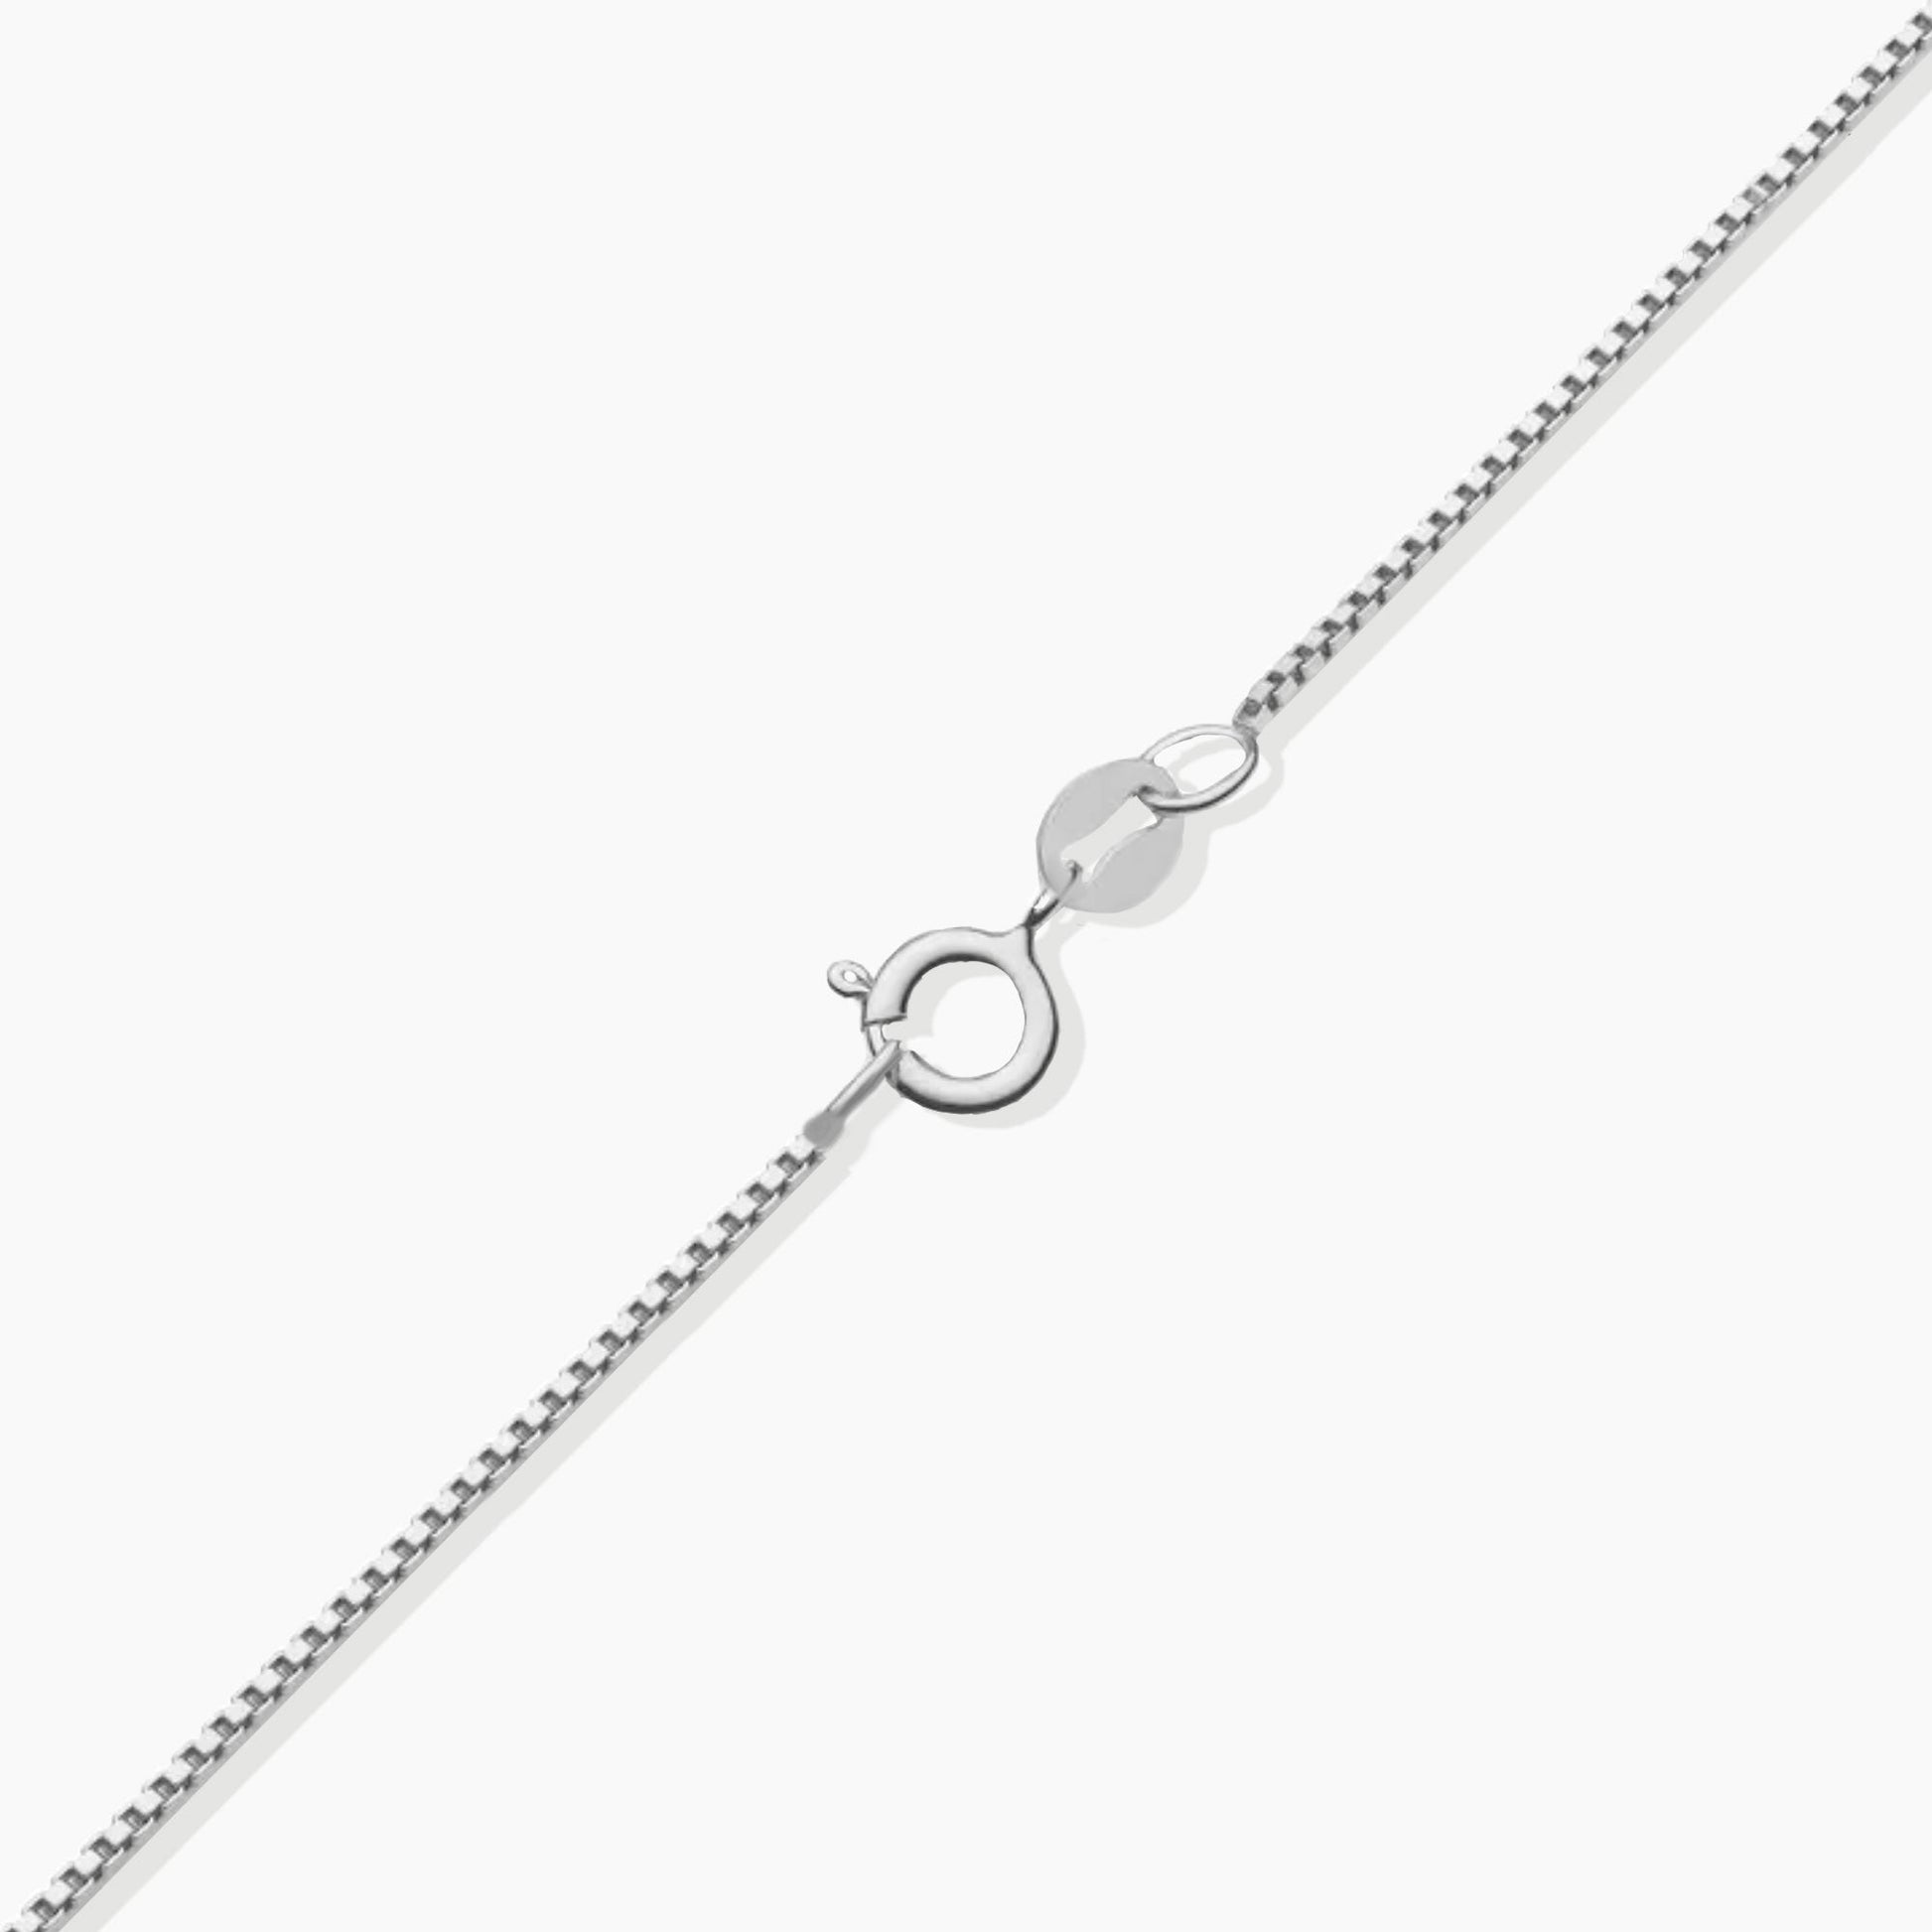 box chain with spring clasp